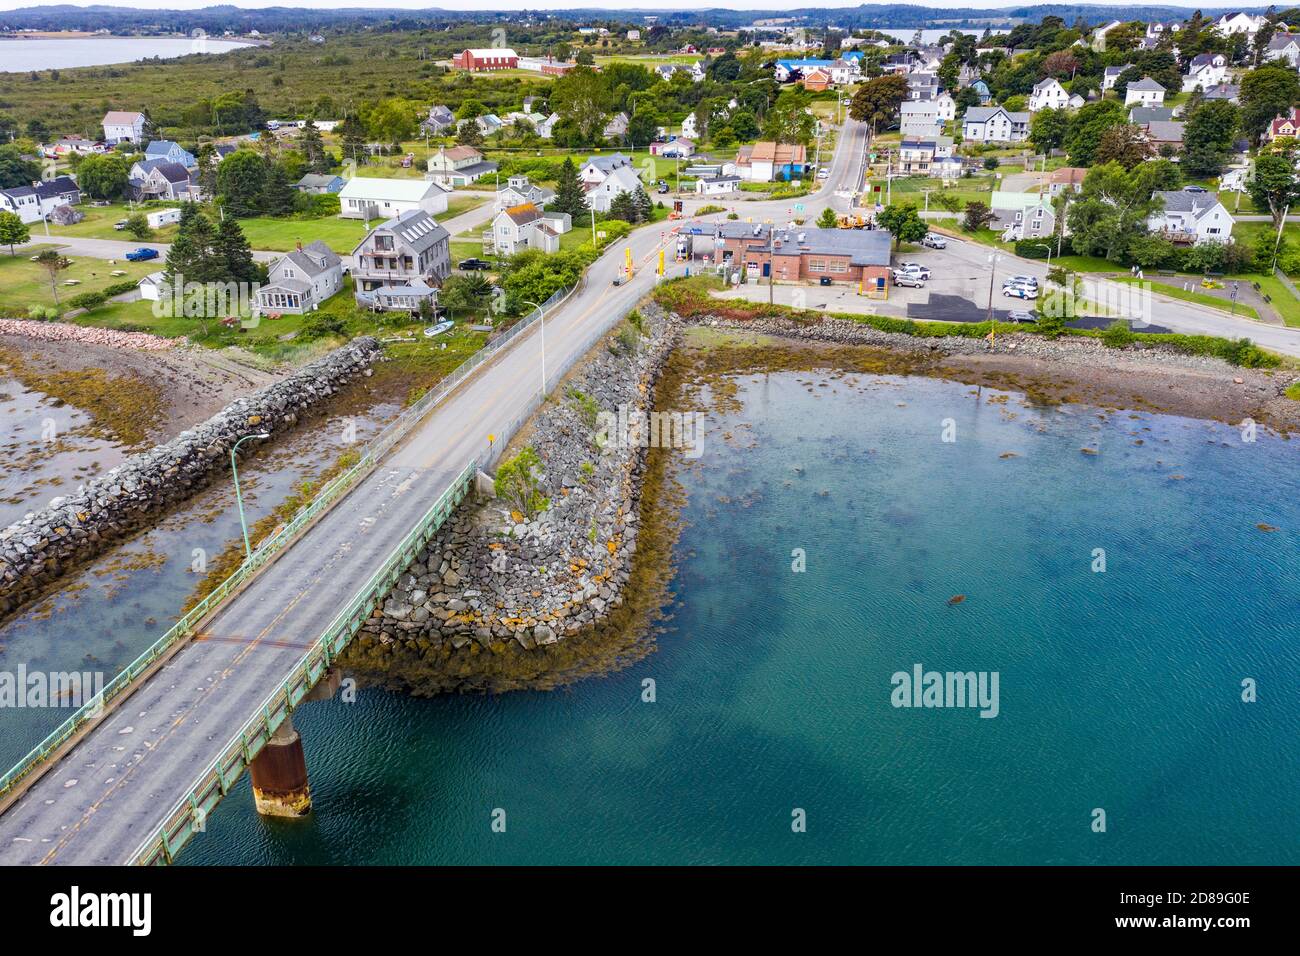 U.S. Customs and Border Protection, USA - Canada Border Crossing during COVID-19, Lubec, Maine, USA Stock Photo